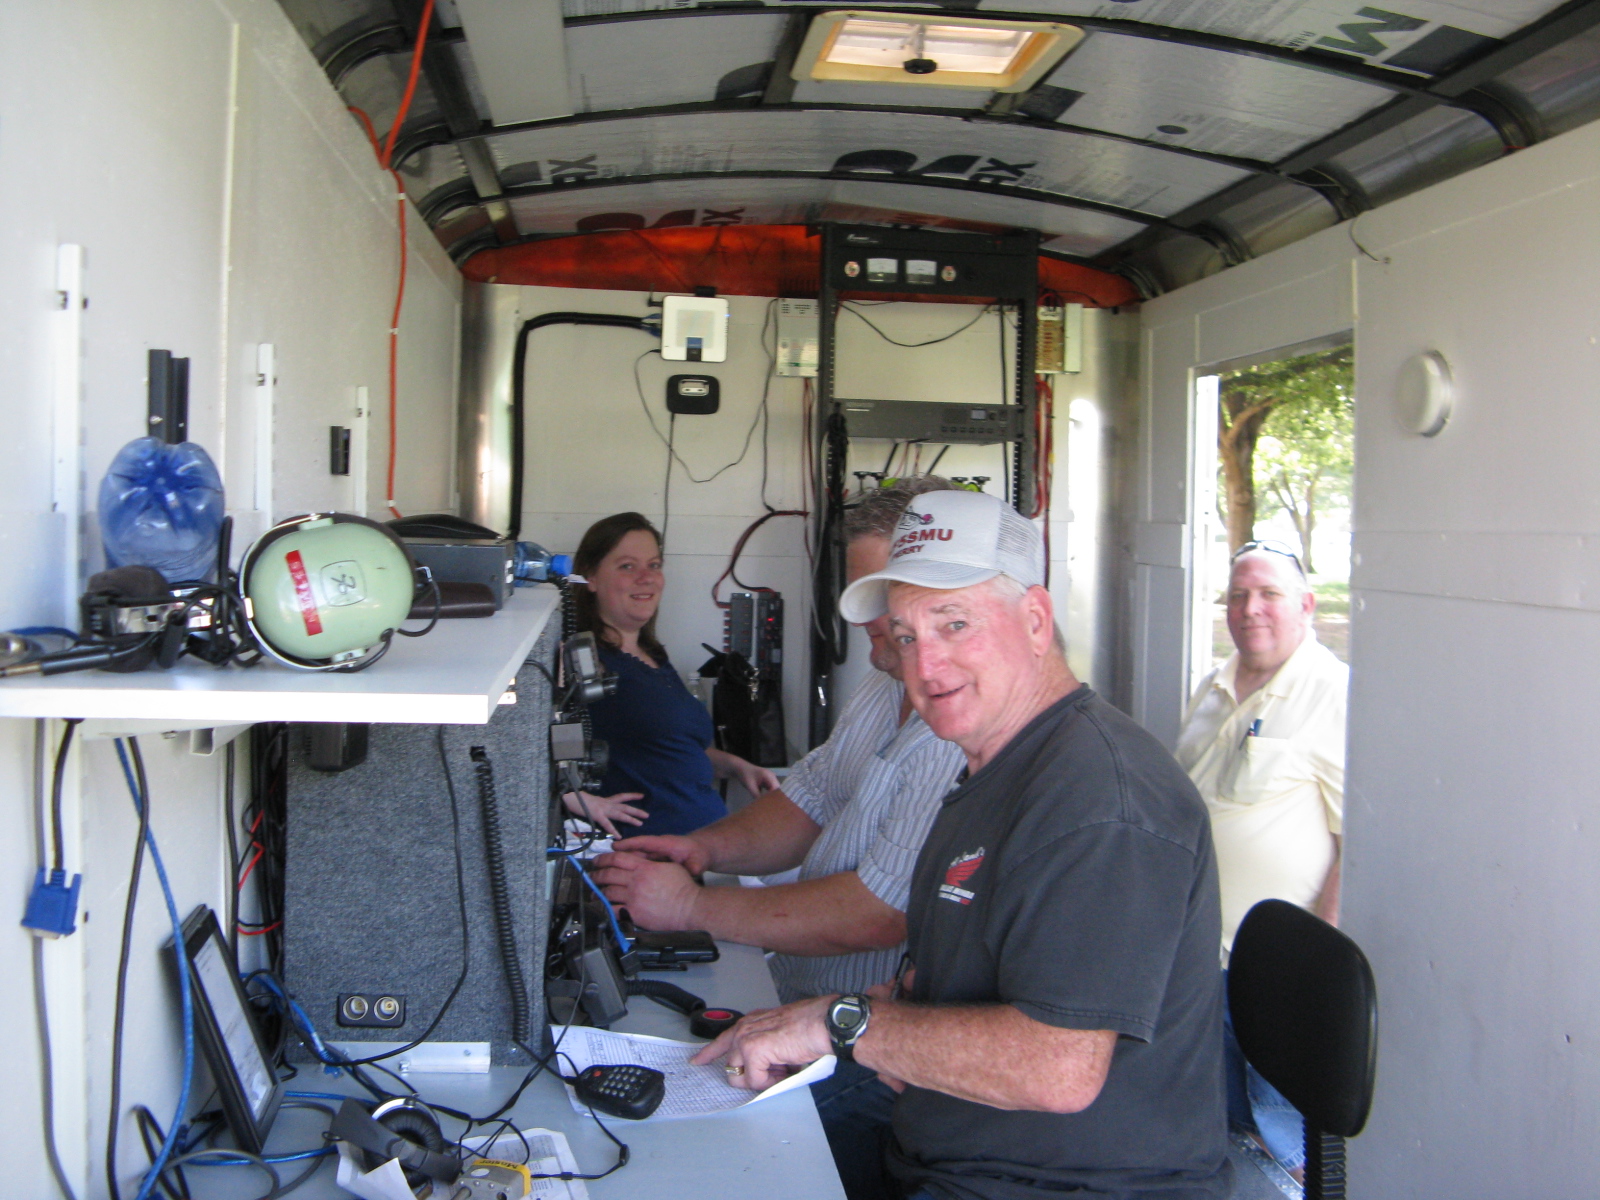 Katie, Don, Perry, and LD inside the communication trailer